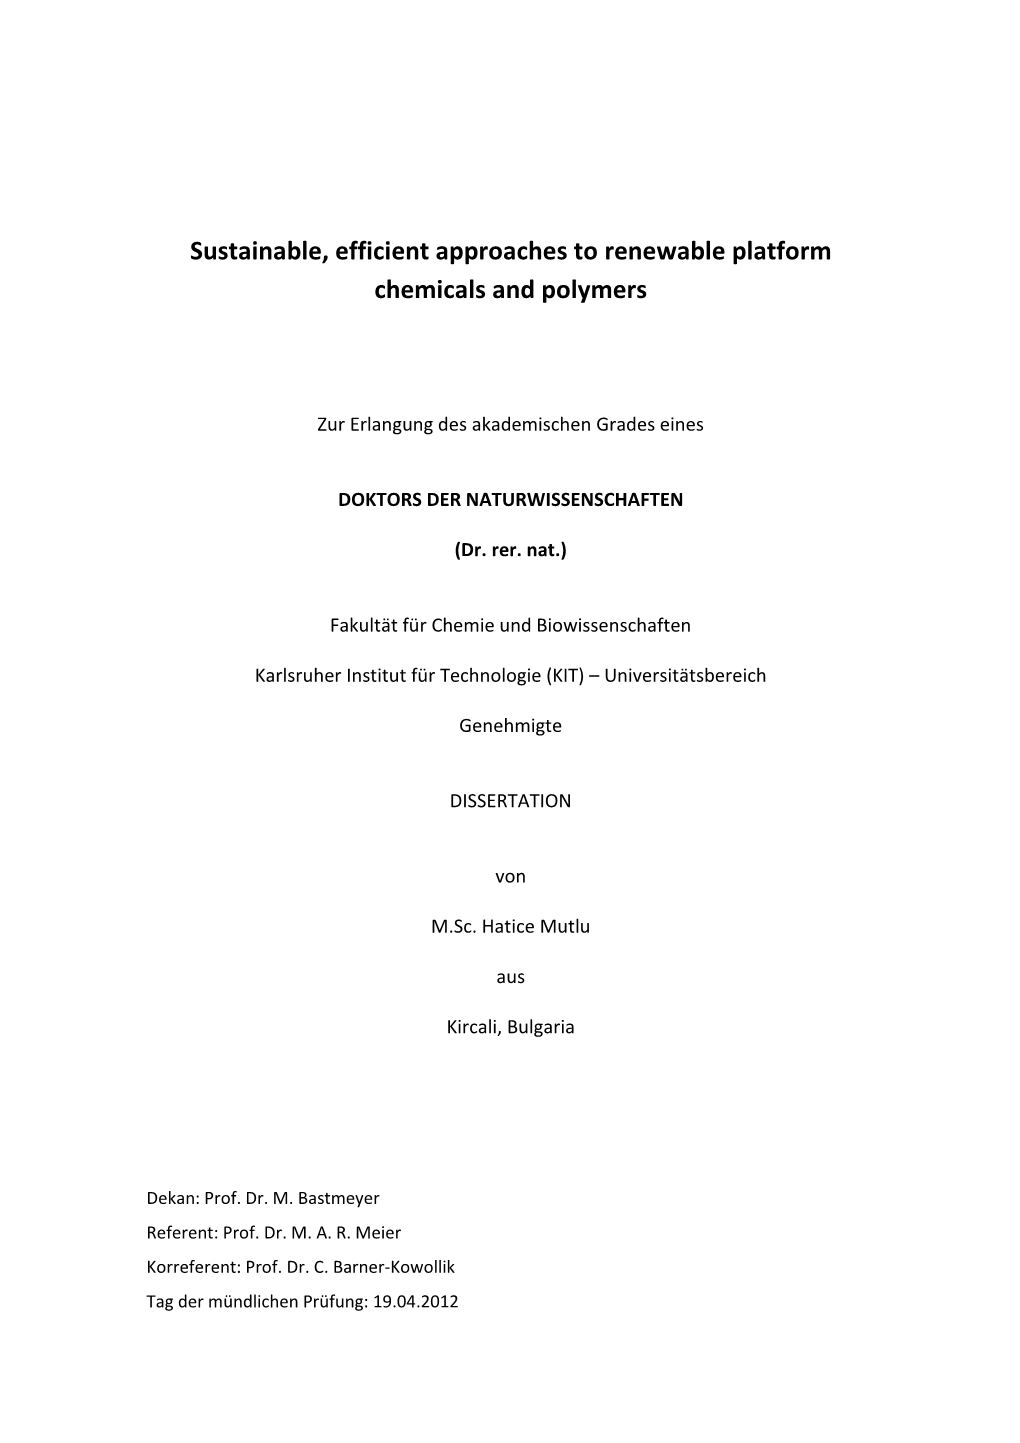 Sustainable, Efficient Approaches to Renewable Platform Chemicals and Polymers